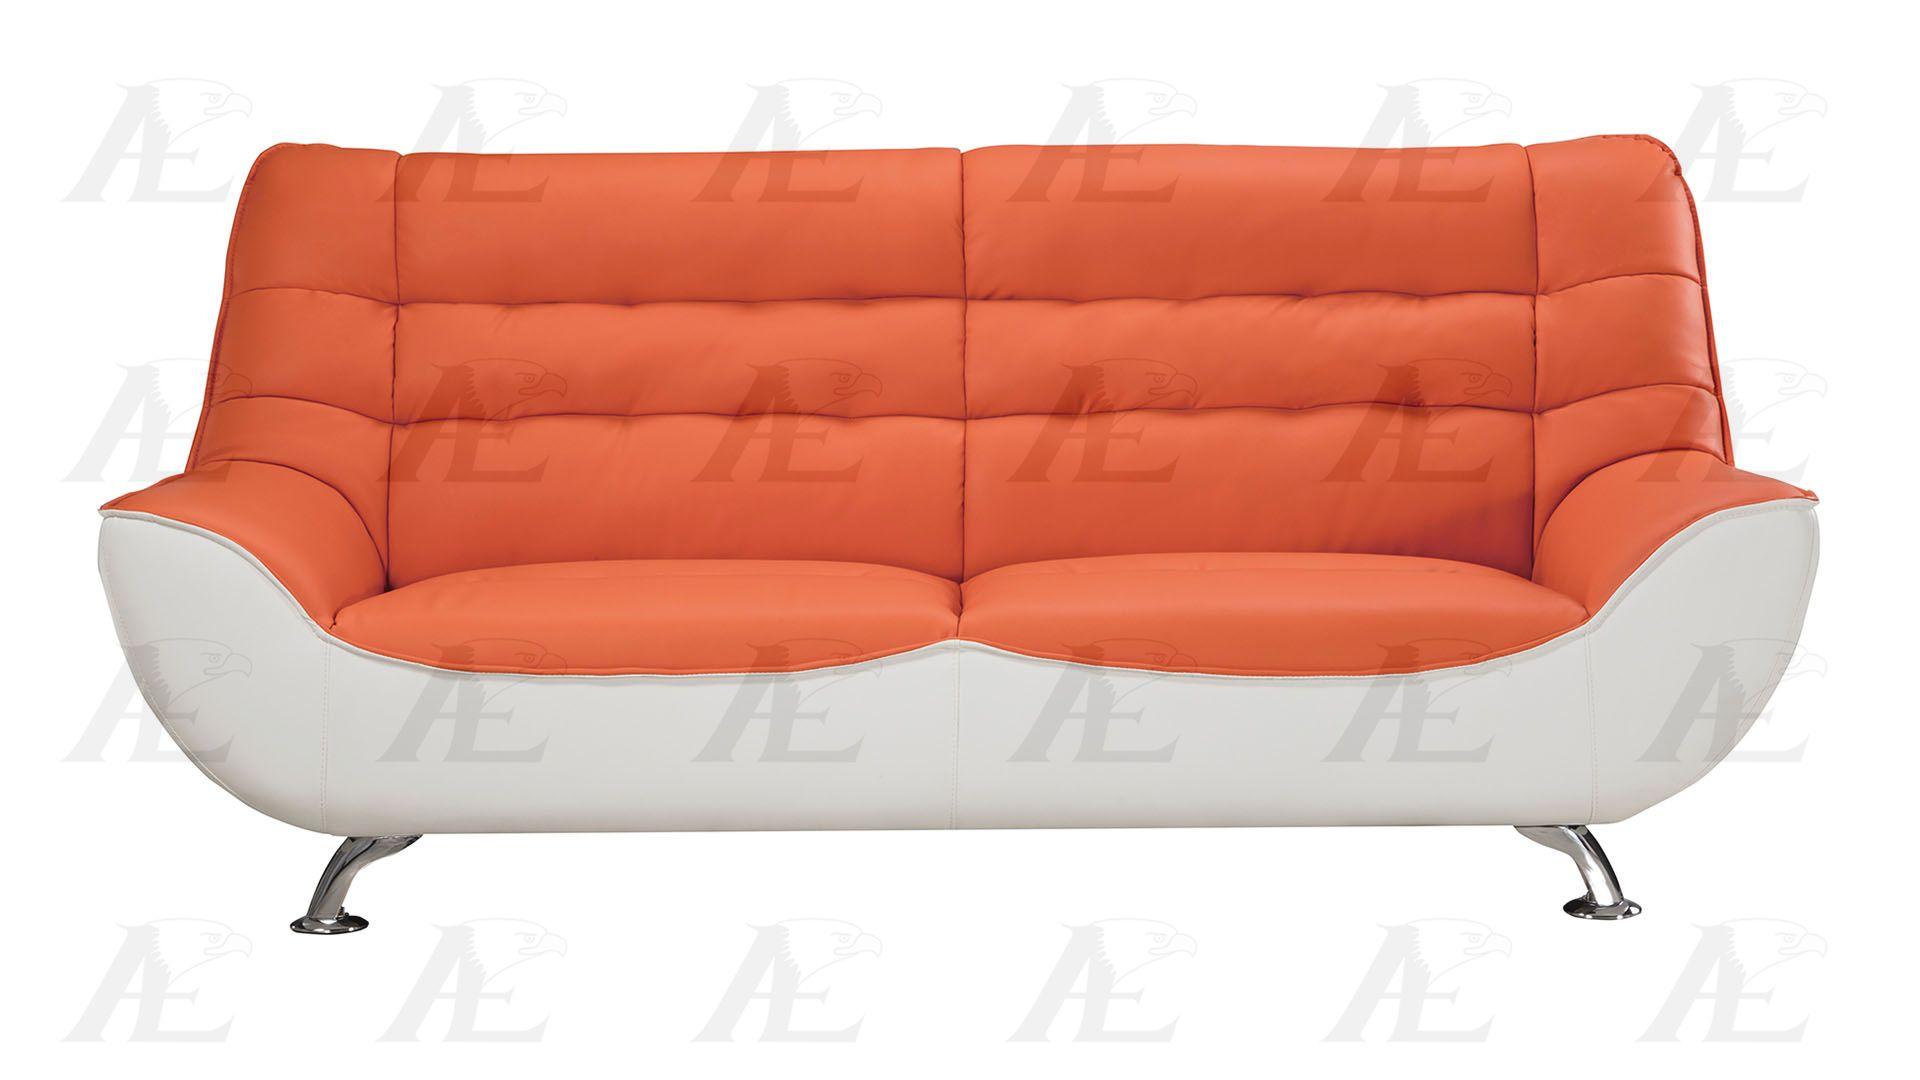 

    
American Eagle Furniture  AE612-ORG.W Orange and White Sofa Loveseat and Chair Set Bonded Leather Modern 3Pcs
